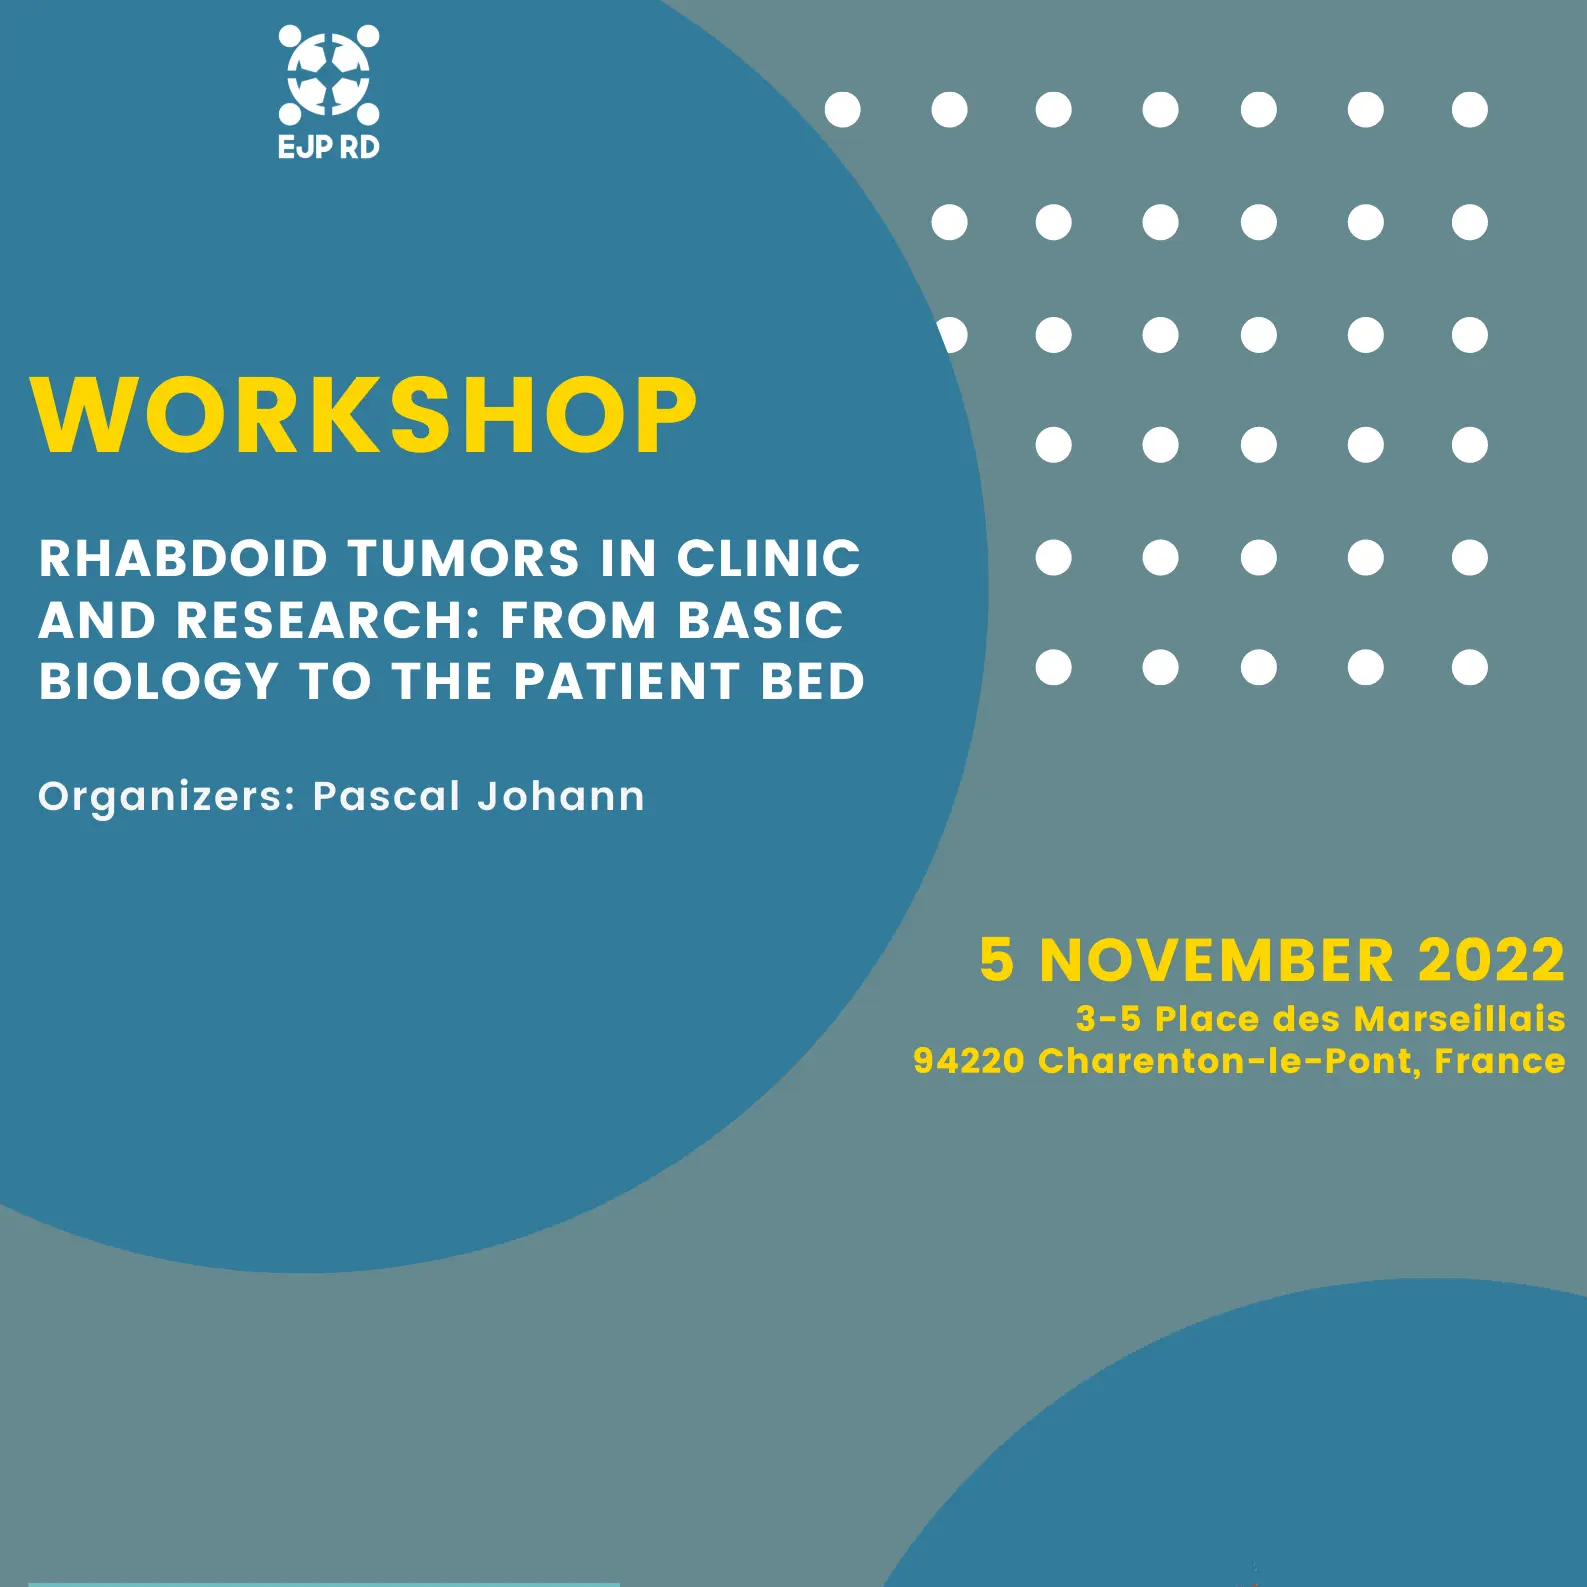 ERN Workshop – Rhabdoid tumors in clinic and research: From basic biology to the patient bed